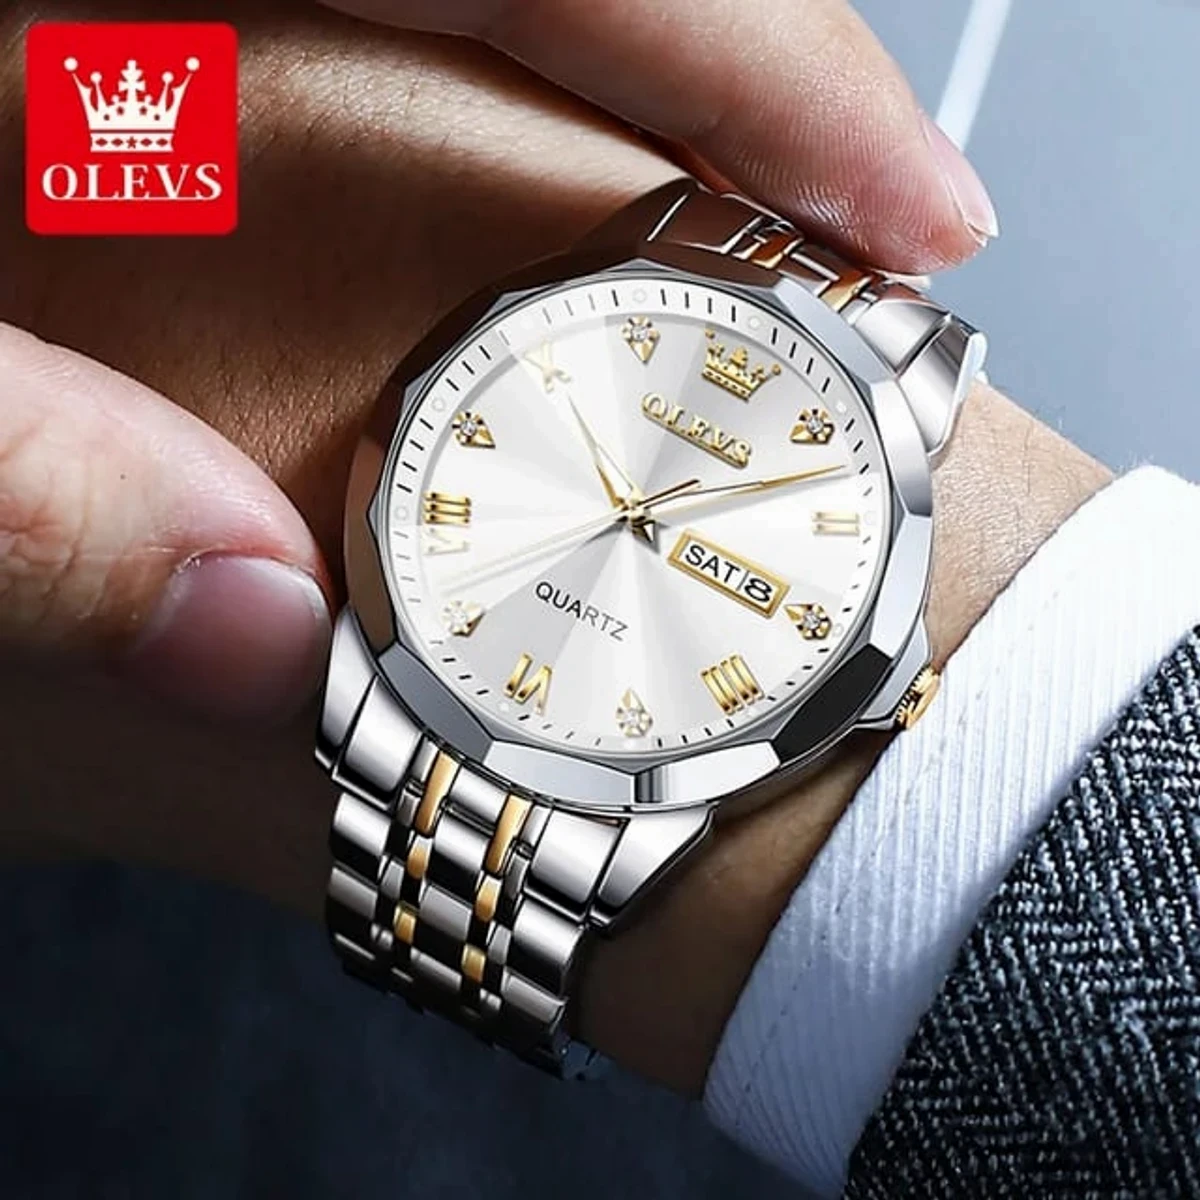 OLEVS MODEL 9931 Watch for Men Stainless Steel Watches - 9941 TOTON AR DIAL WHITE- MAN WATCH